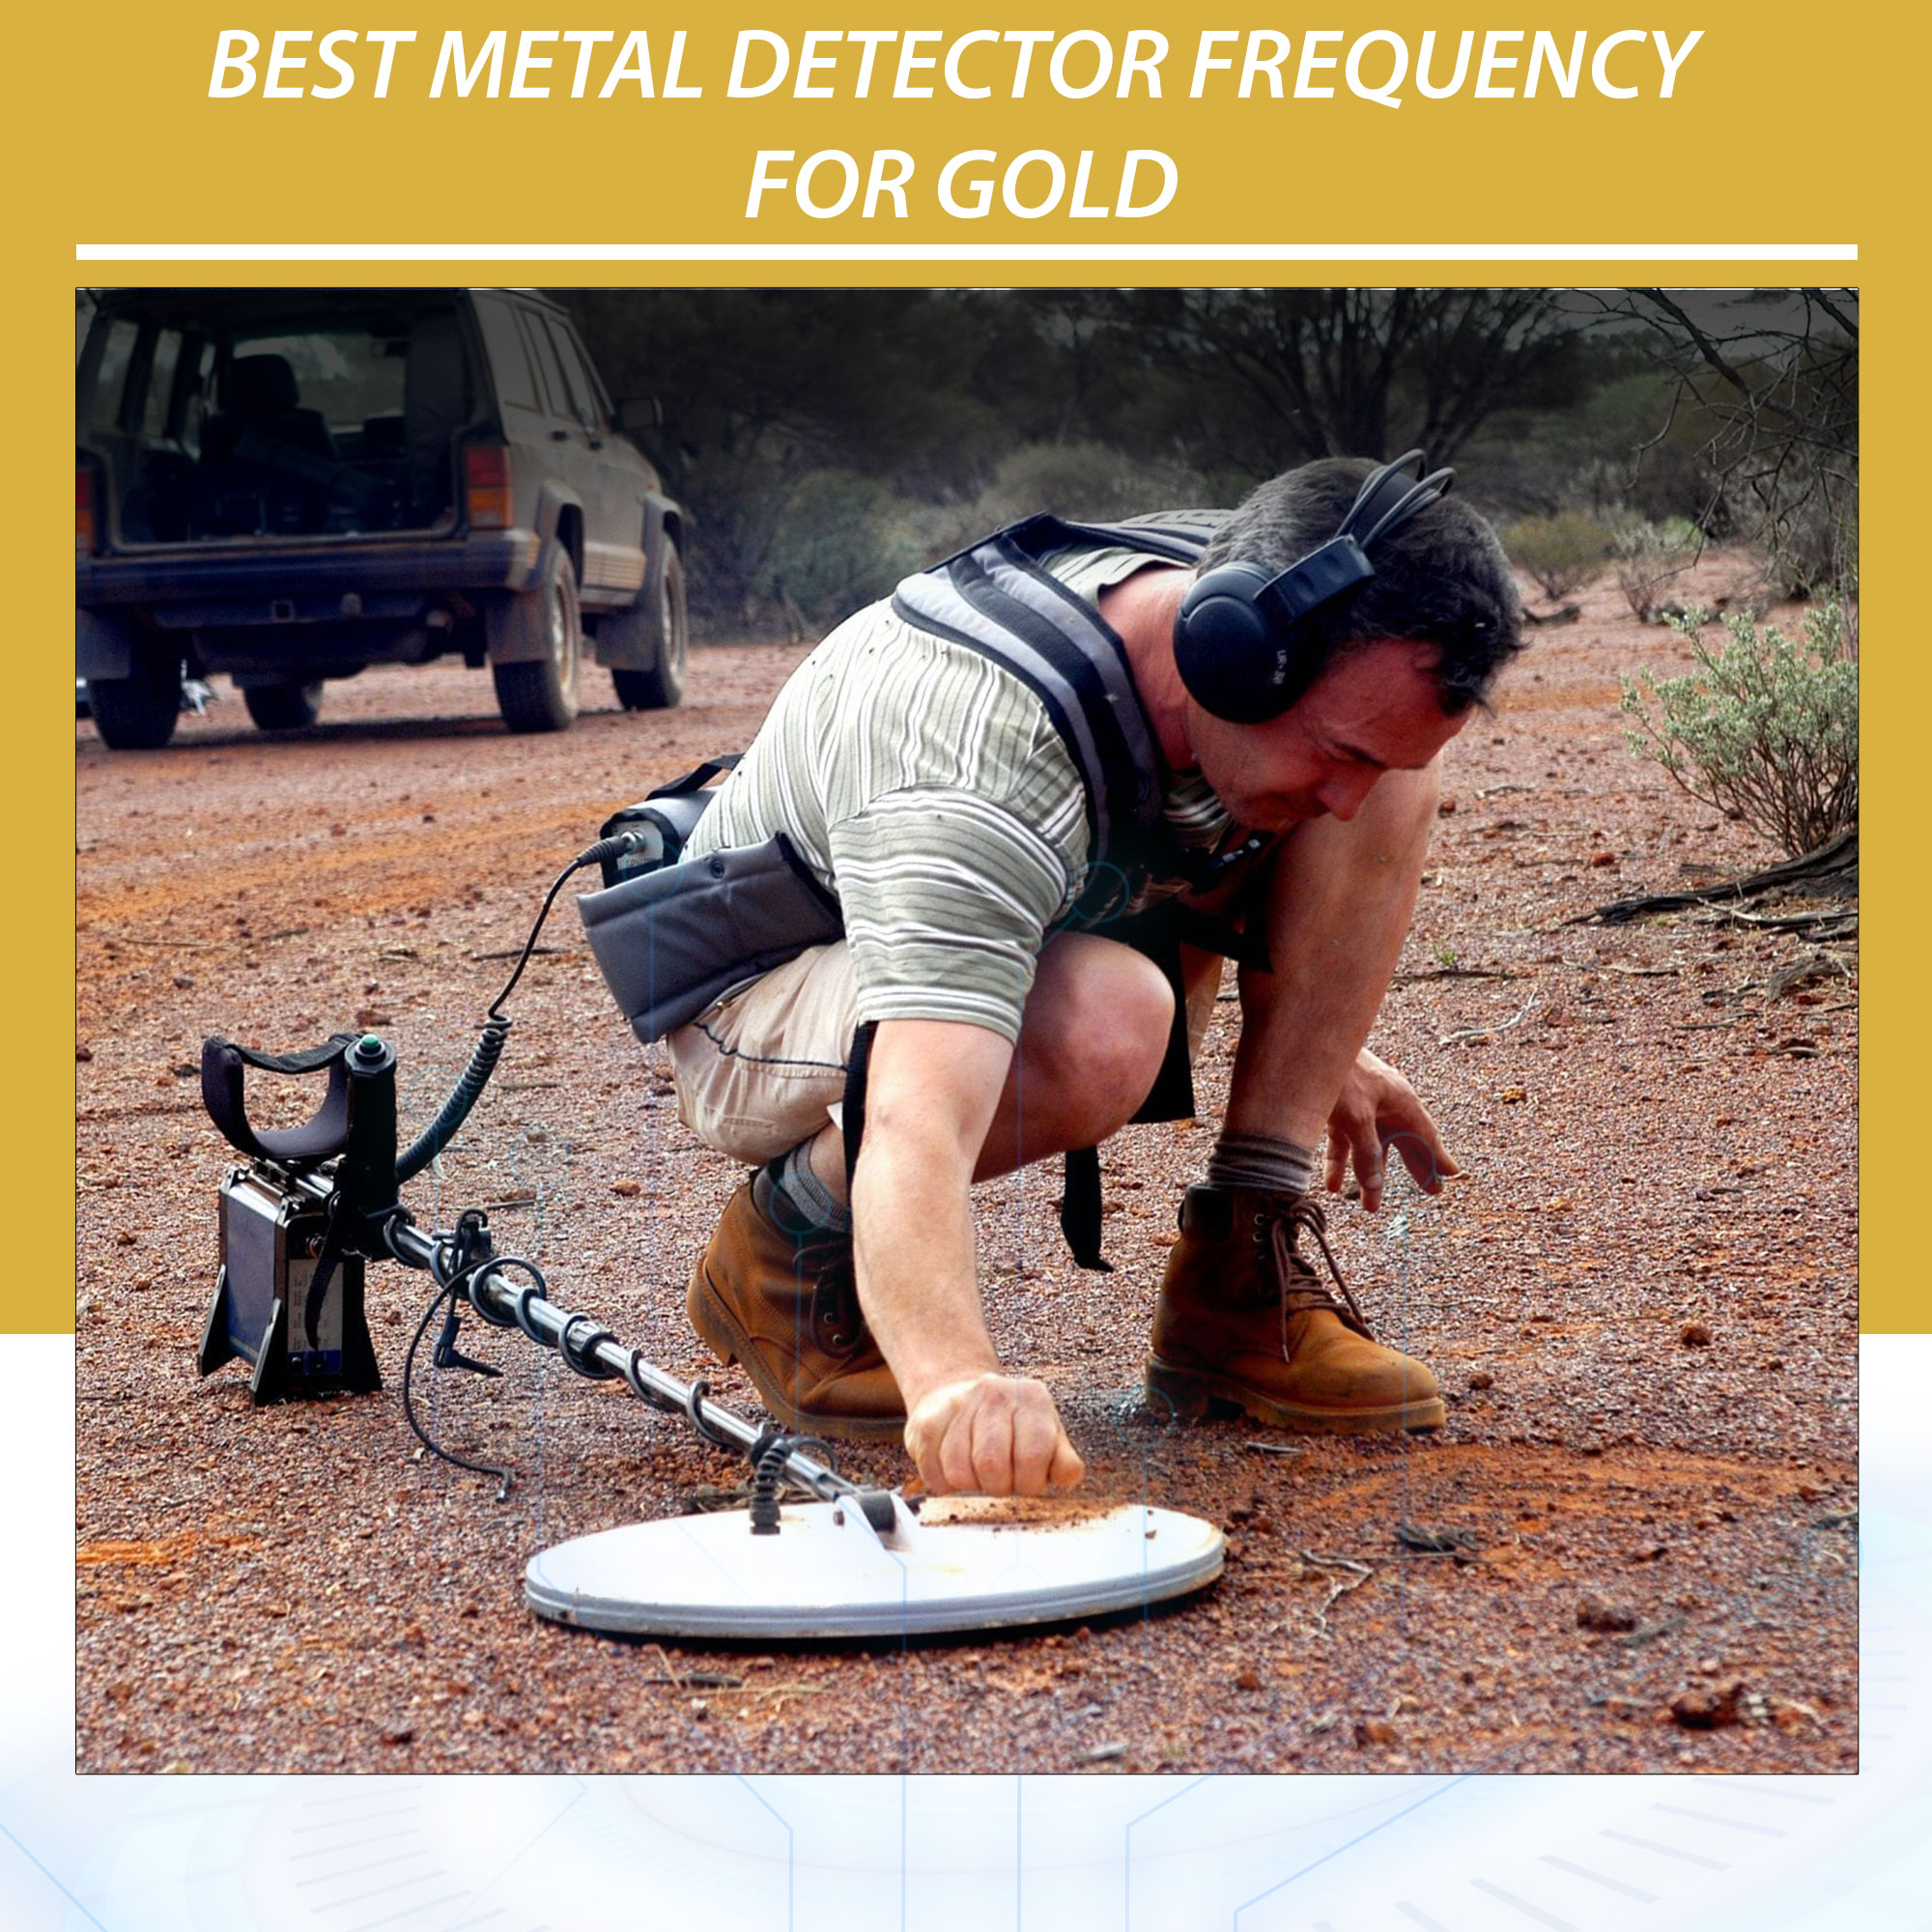 Best Metal Detector Frequency for Gold